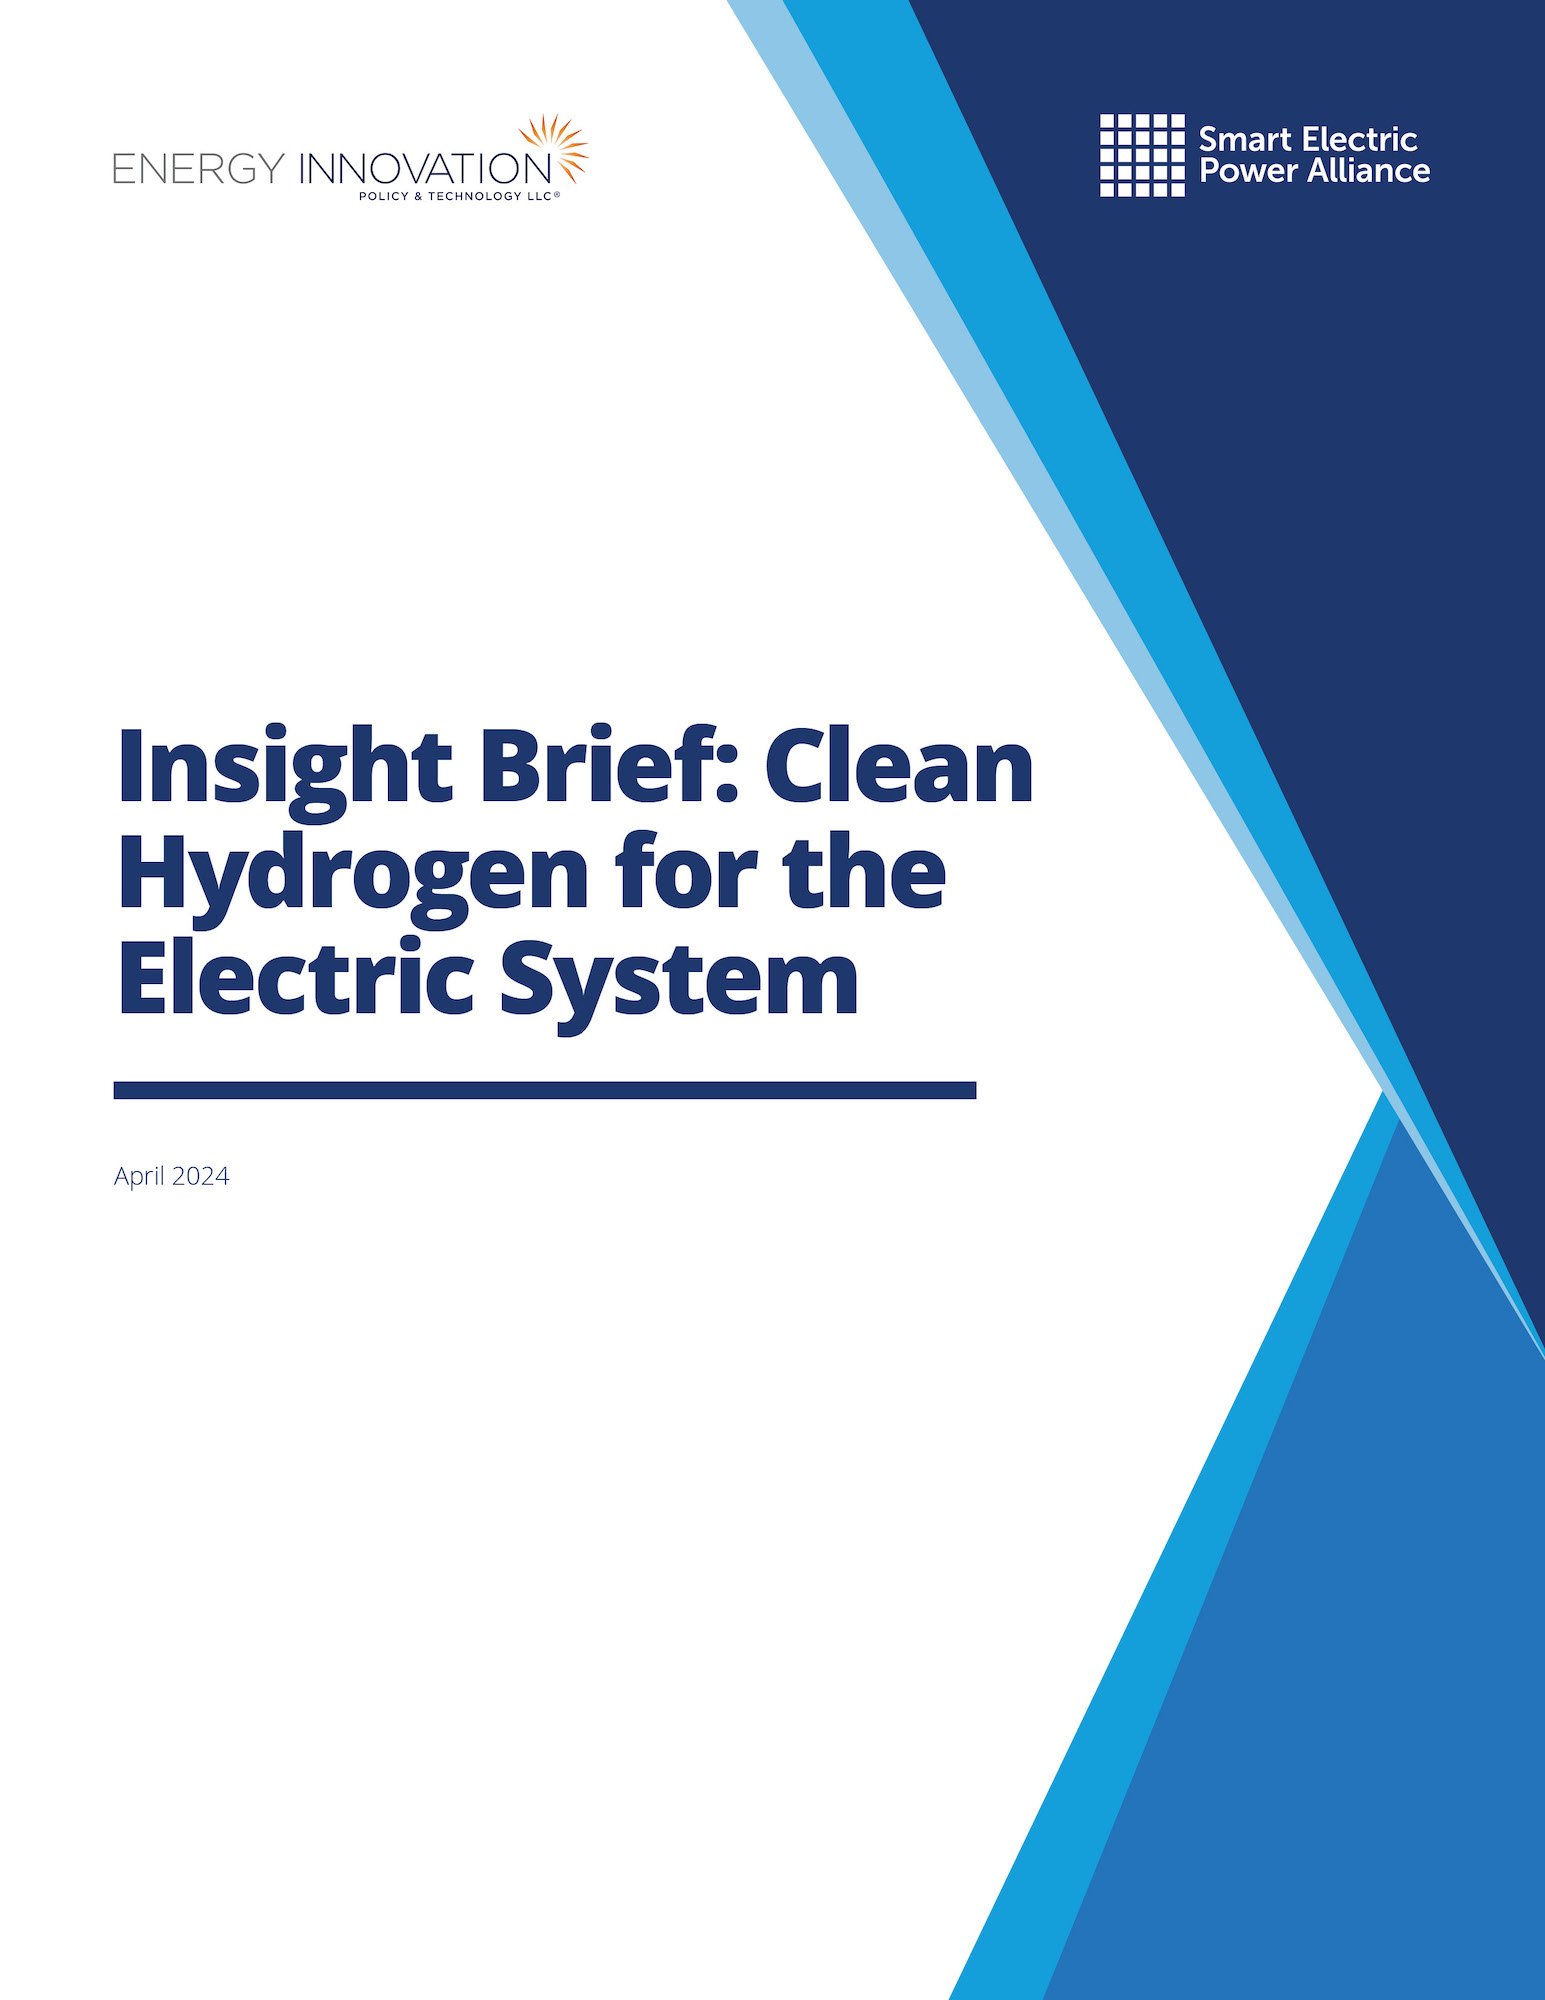 Insight Brief: Clean Hydrogen for the Electric System